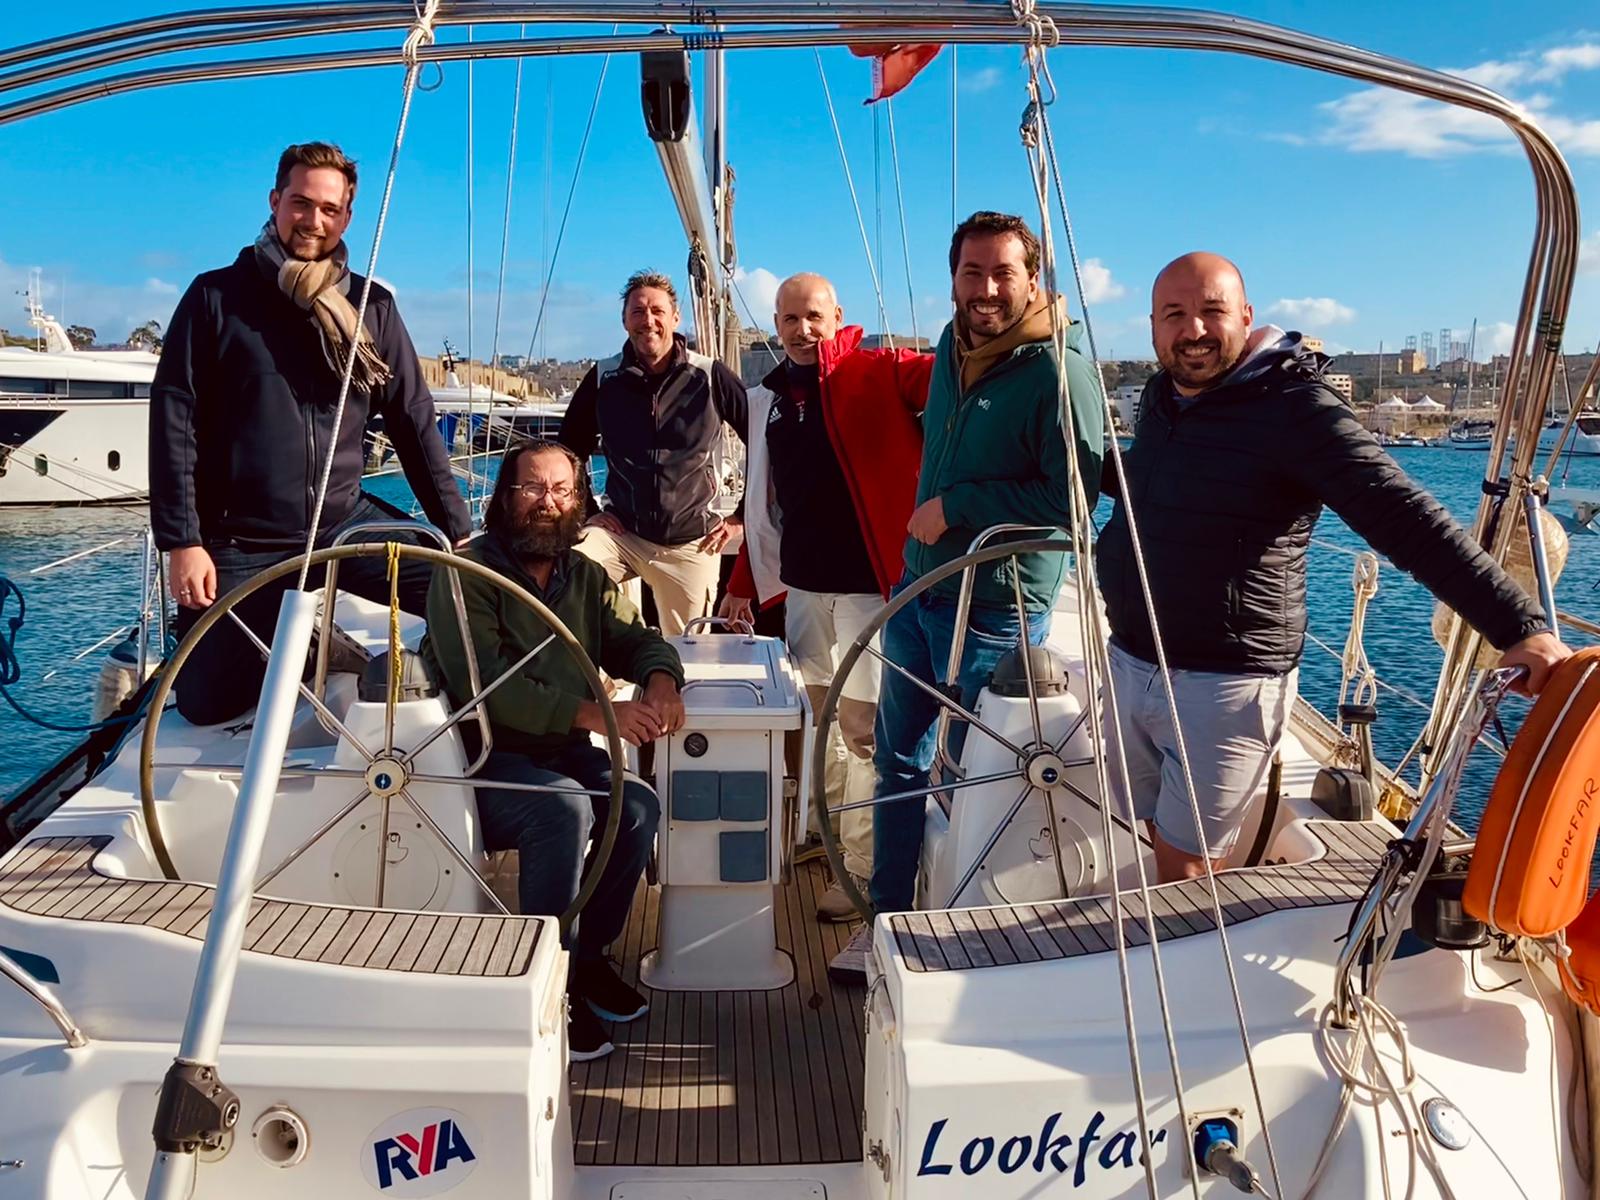 course-cover-rya-commercial-endorsements